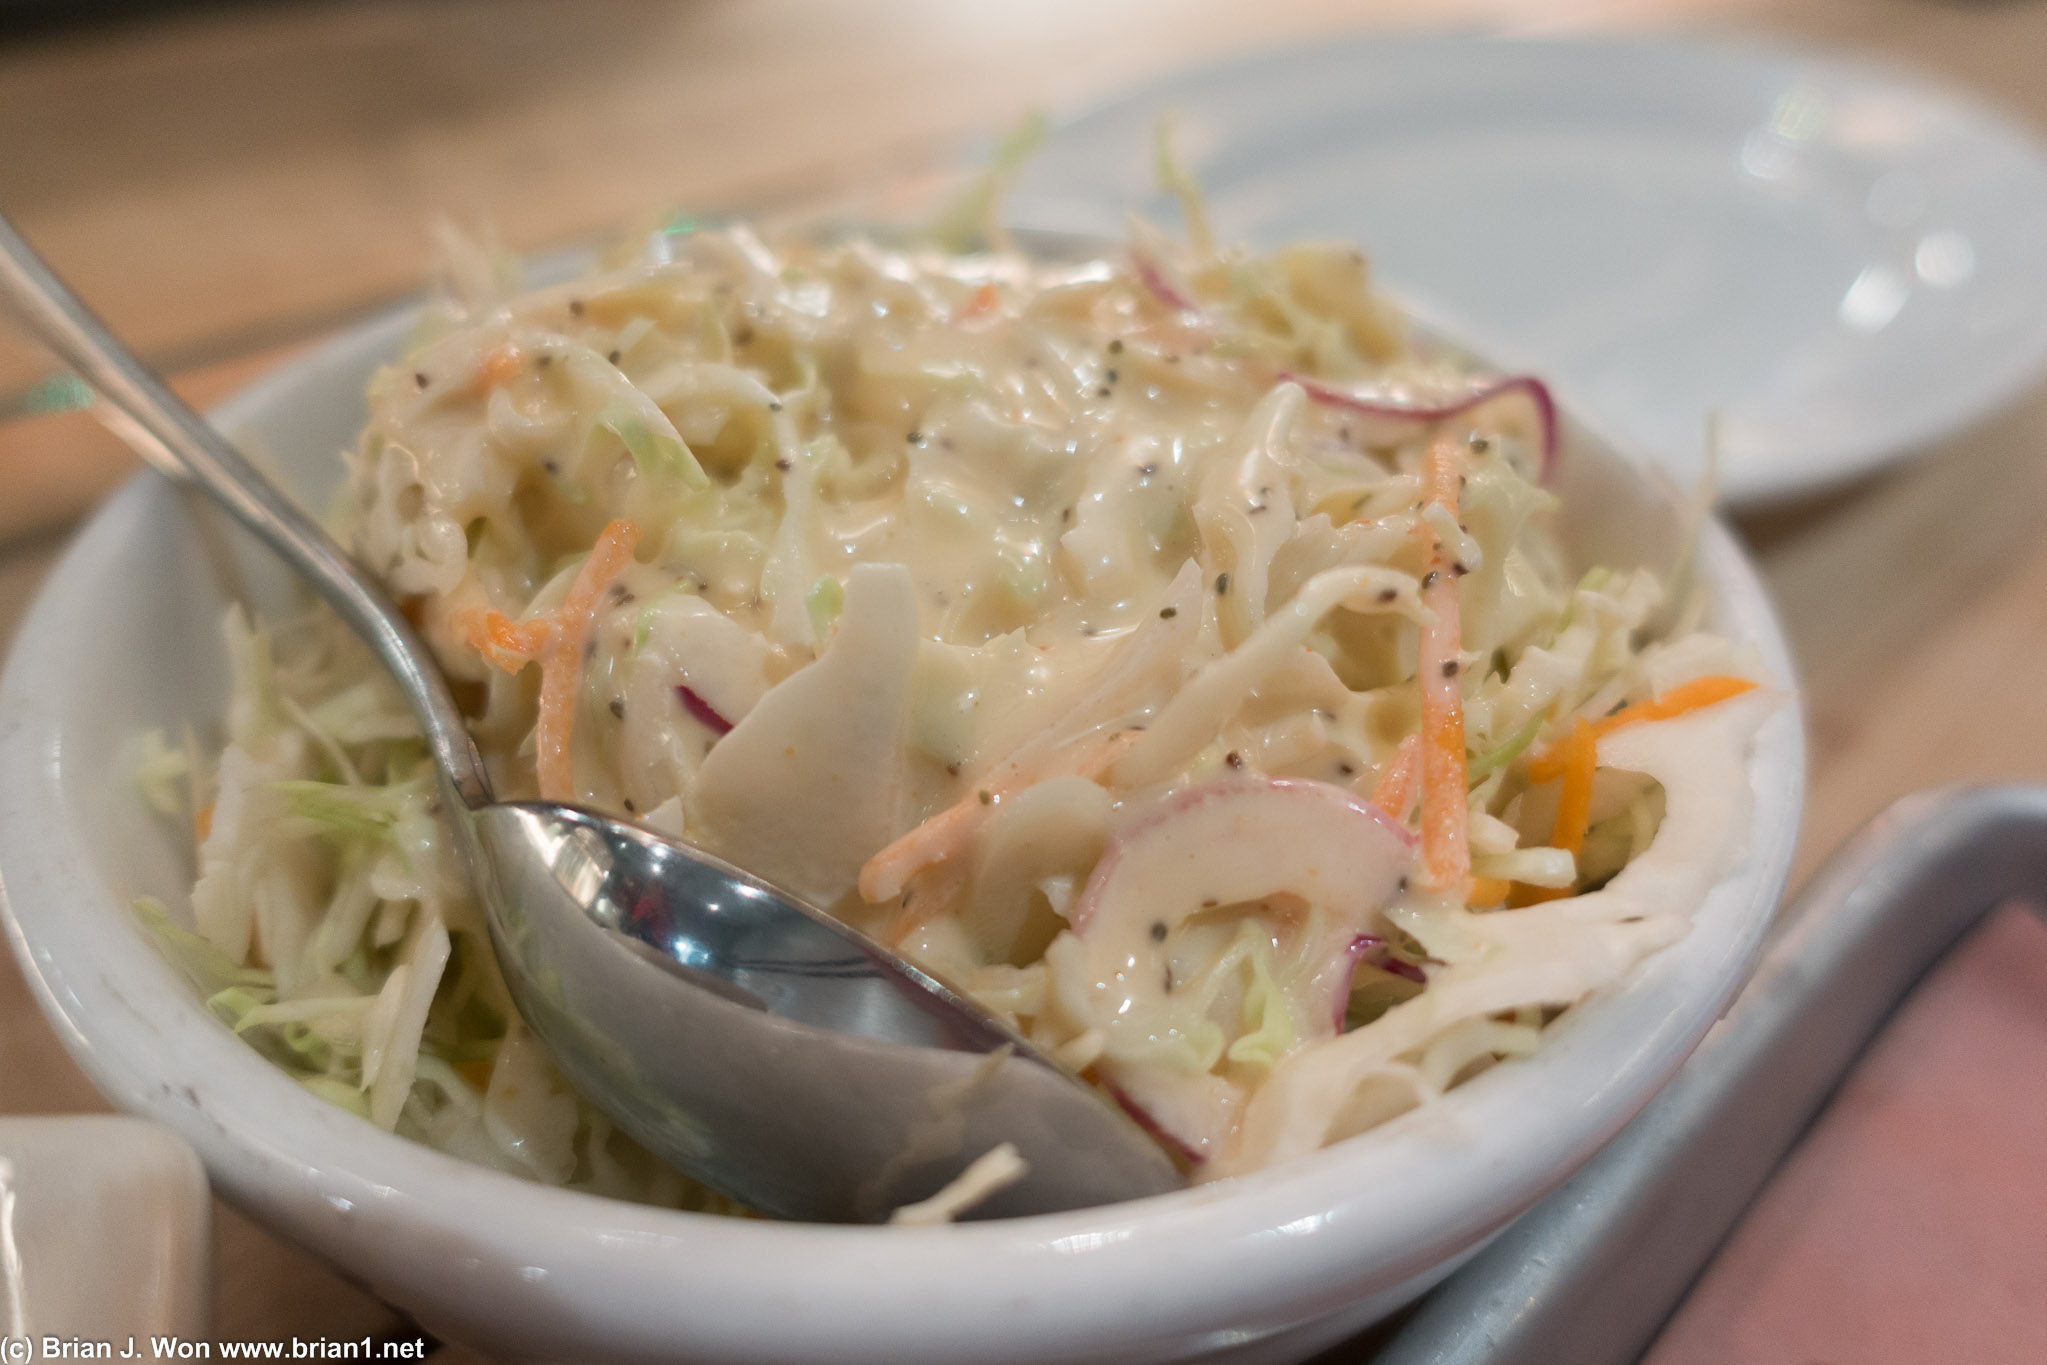 Coleslaw was pretty solid tho. Probably the best thing on the menu.